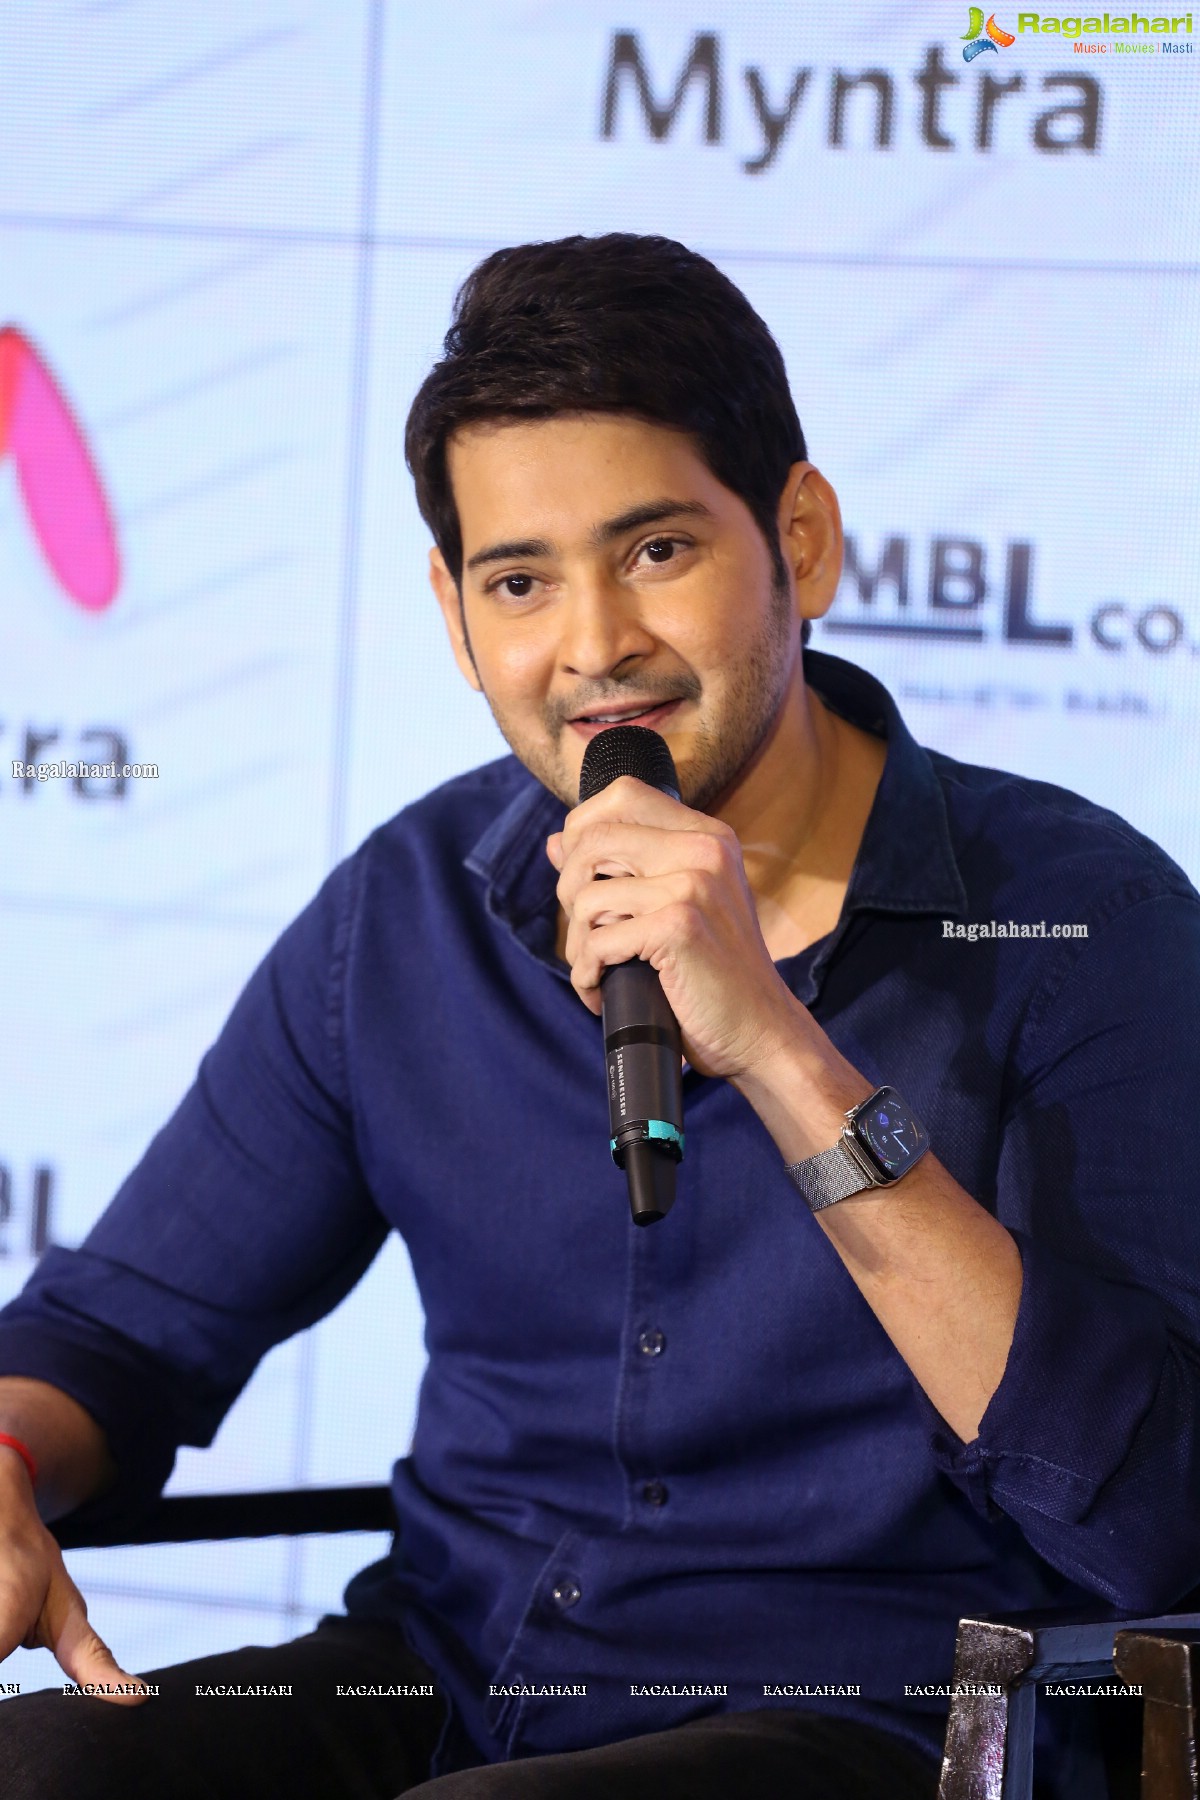 Mahesh Babu’s The Humbl Co. Joins Hands with Myntra